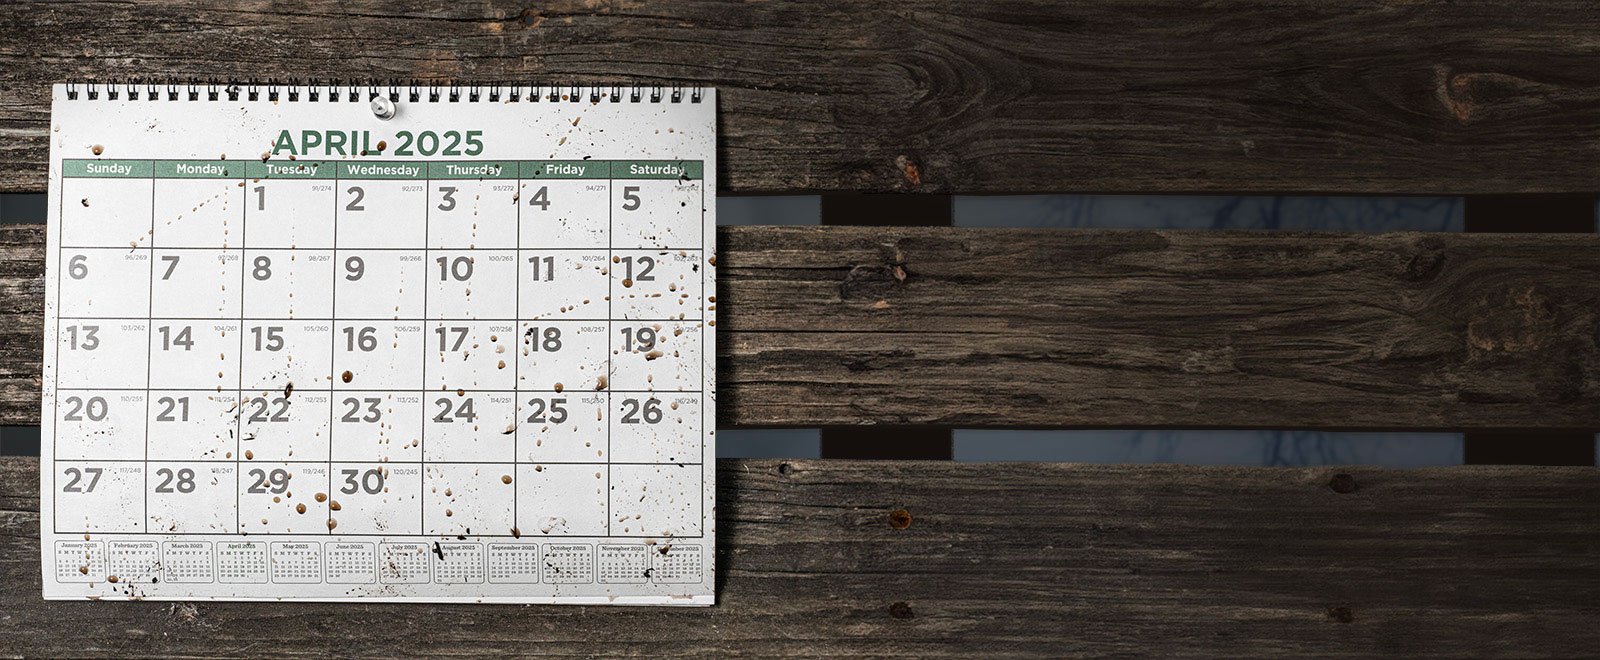 Picture of a muddy calendar hanging on the wall.